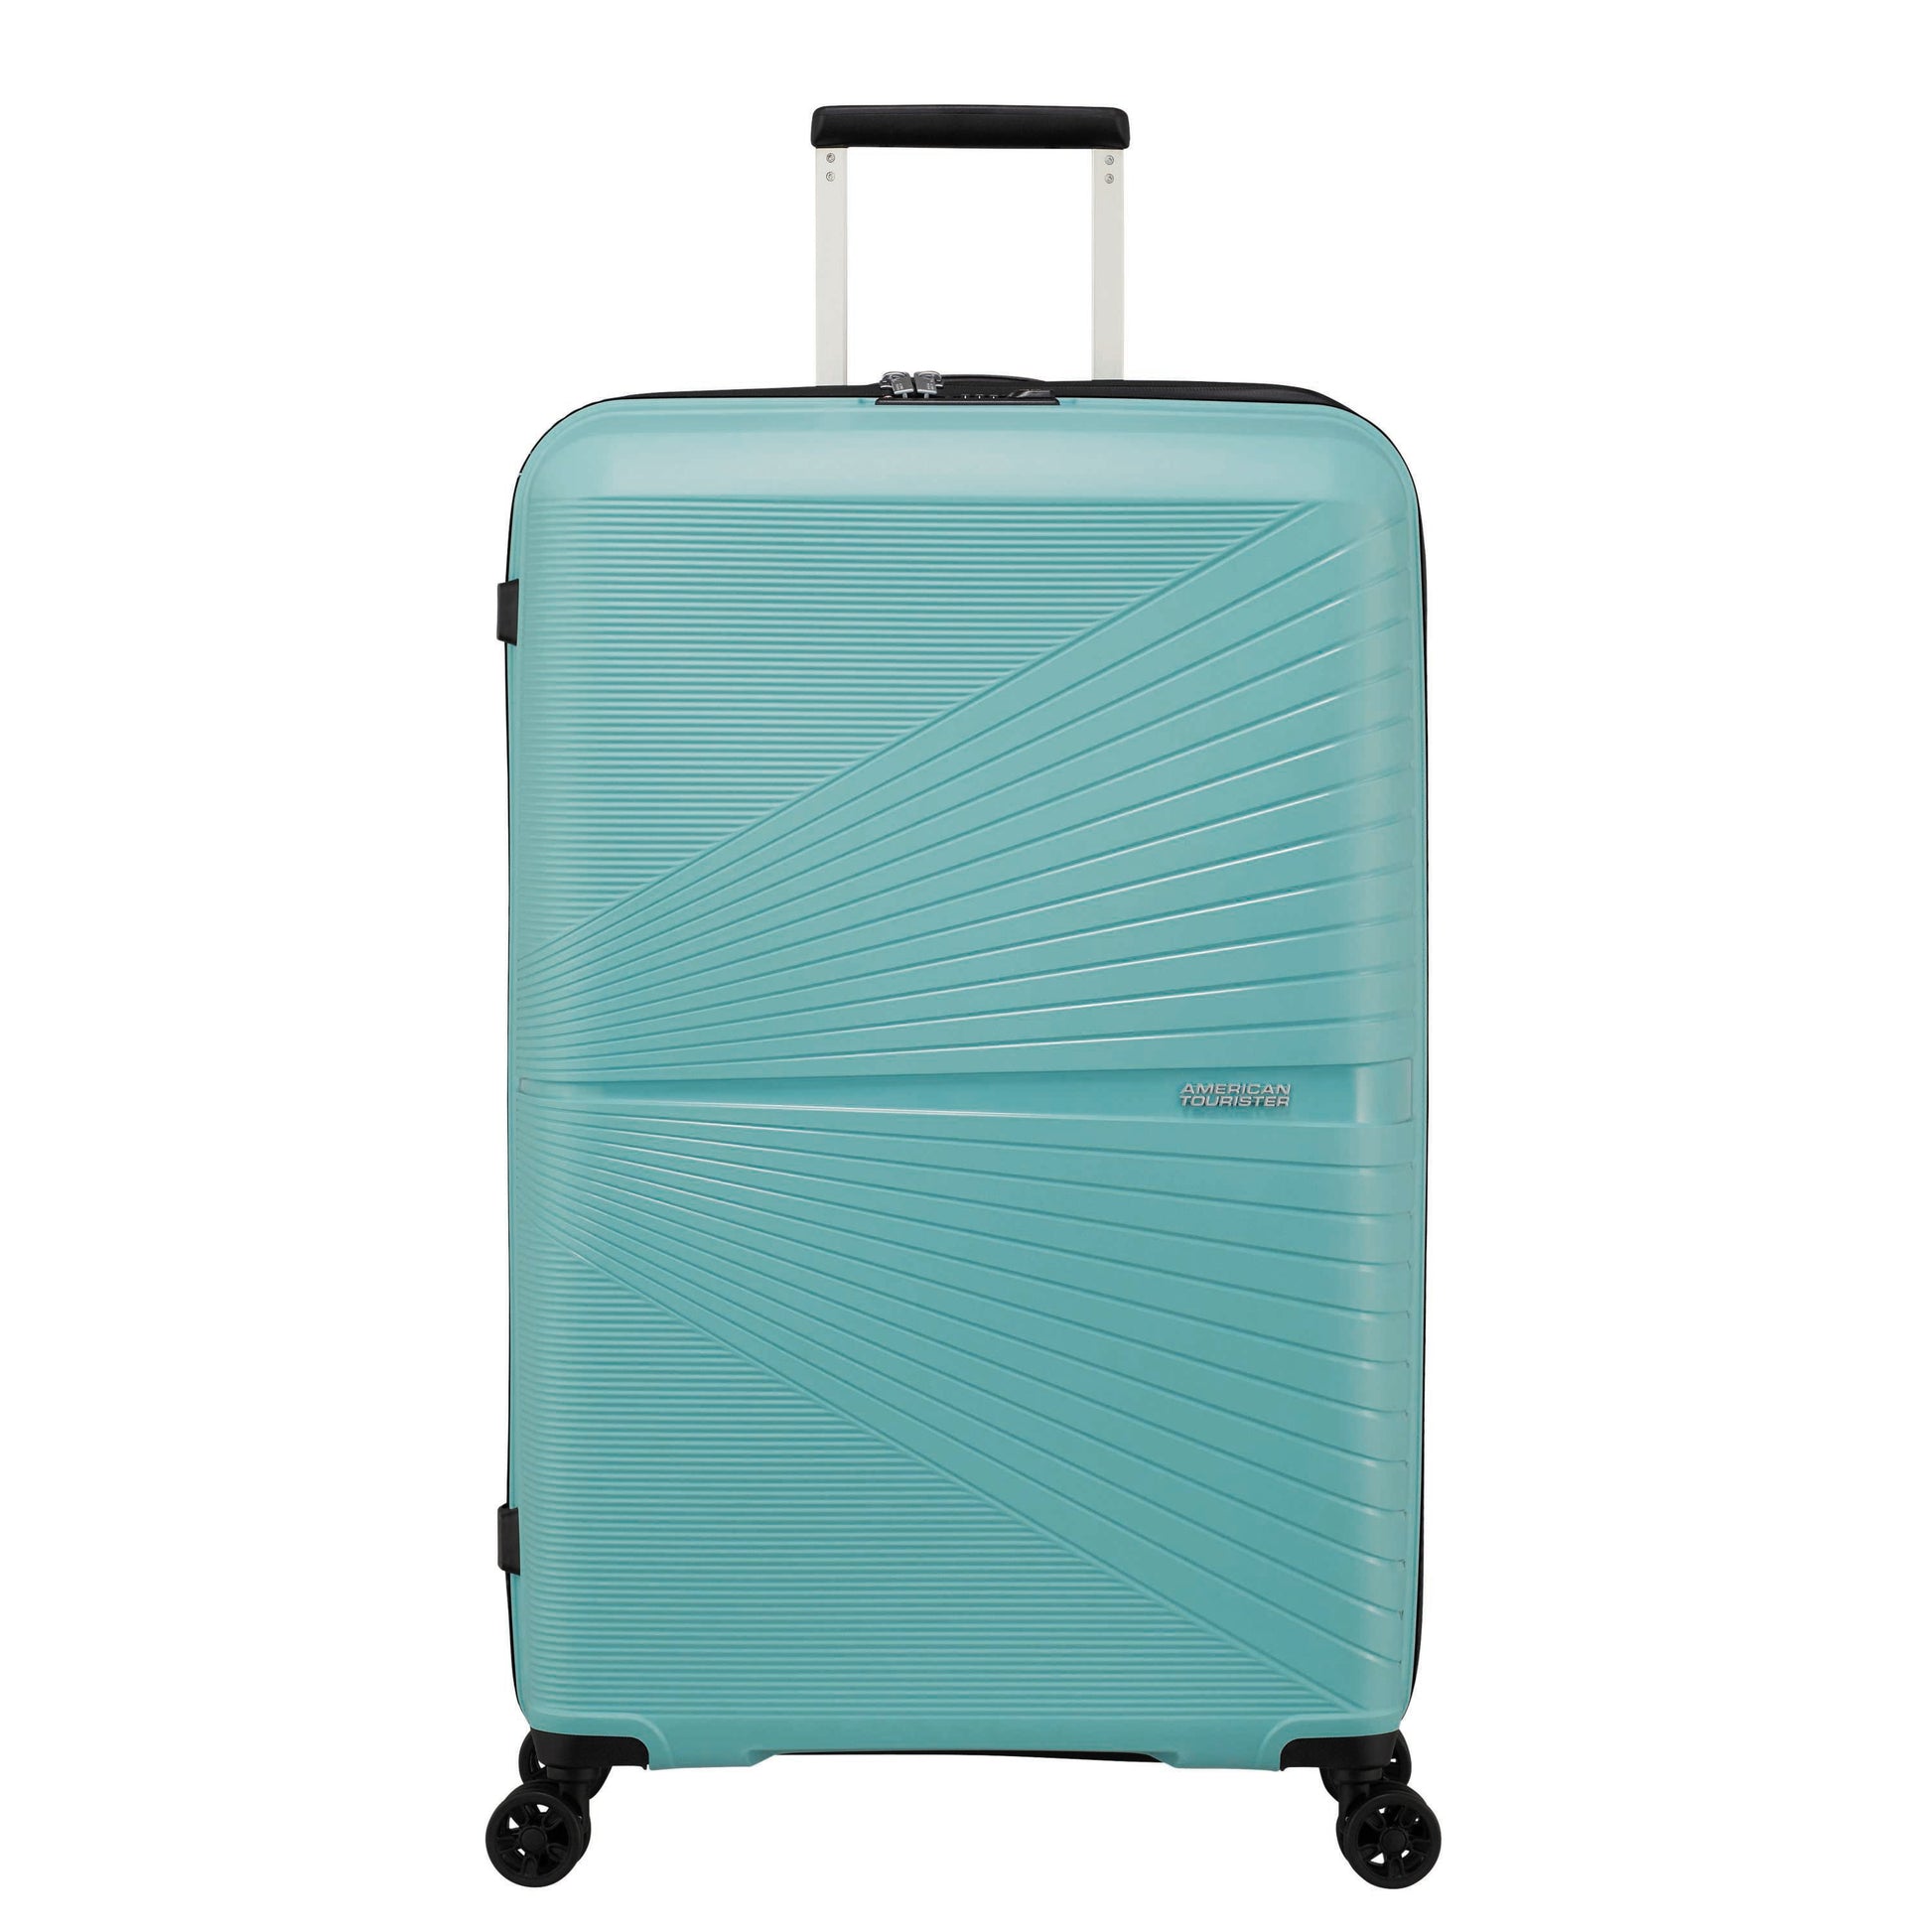 American Tourister Airconic Spinner Large Luggage - Purist Blue